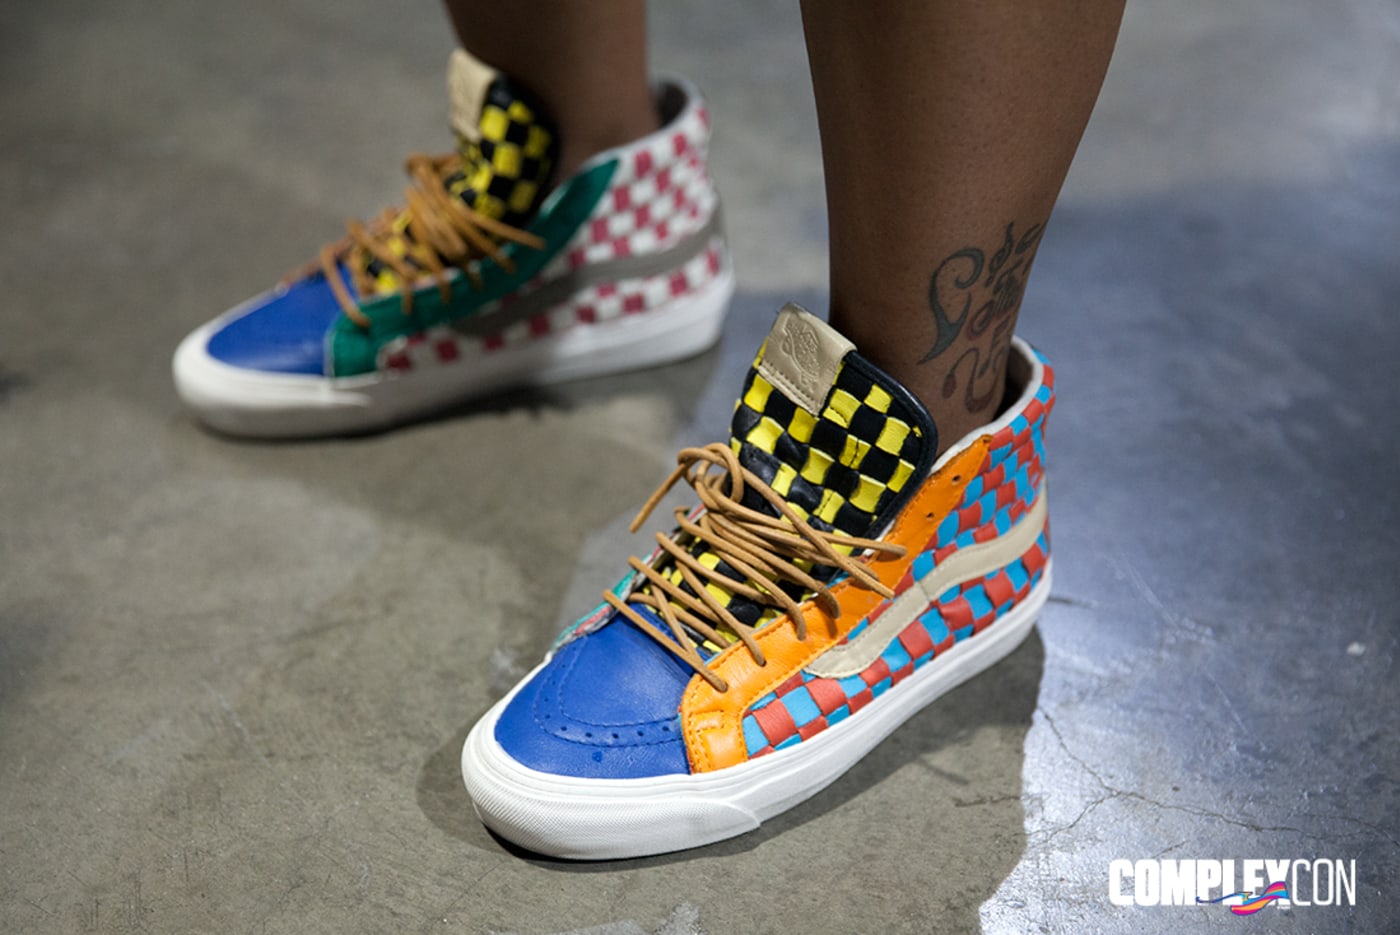 Hick malm latin Best Sneakers Worn at ComplexCon 2016 Day 1 | Complex